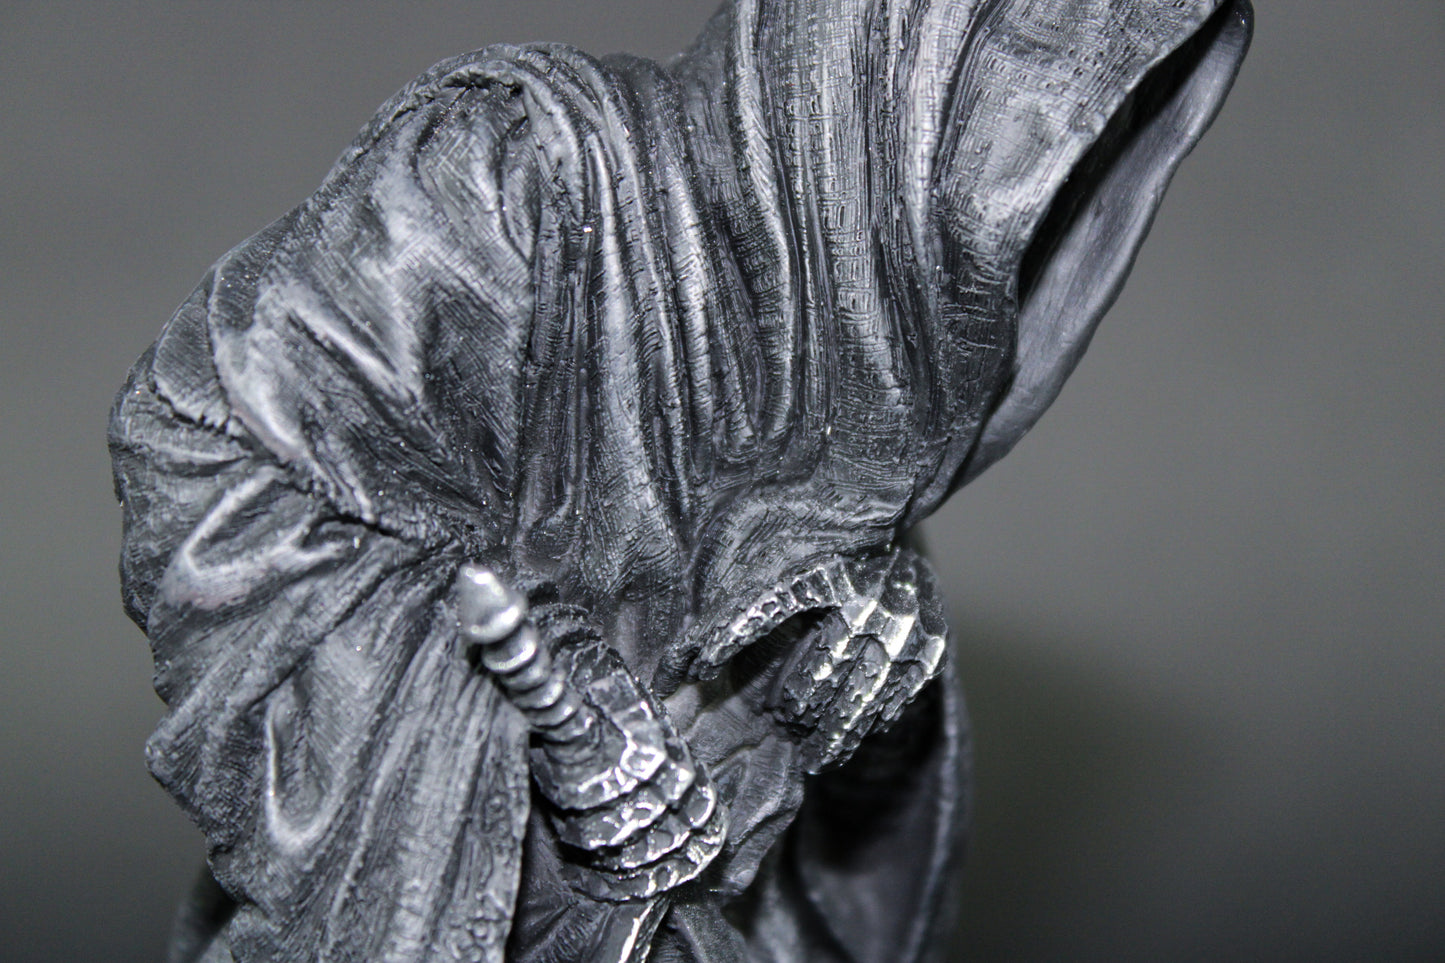 Ringwraith Lord of the Rings Mini Statue by Weta Workshop